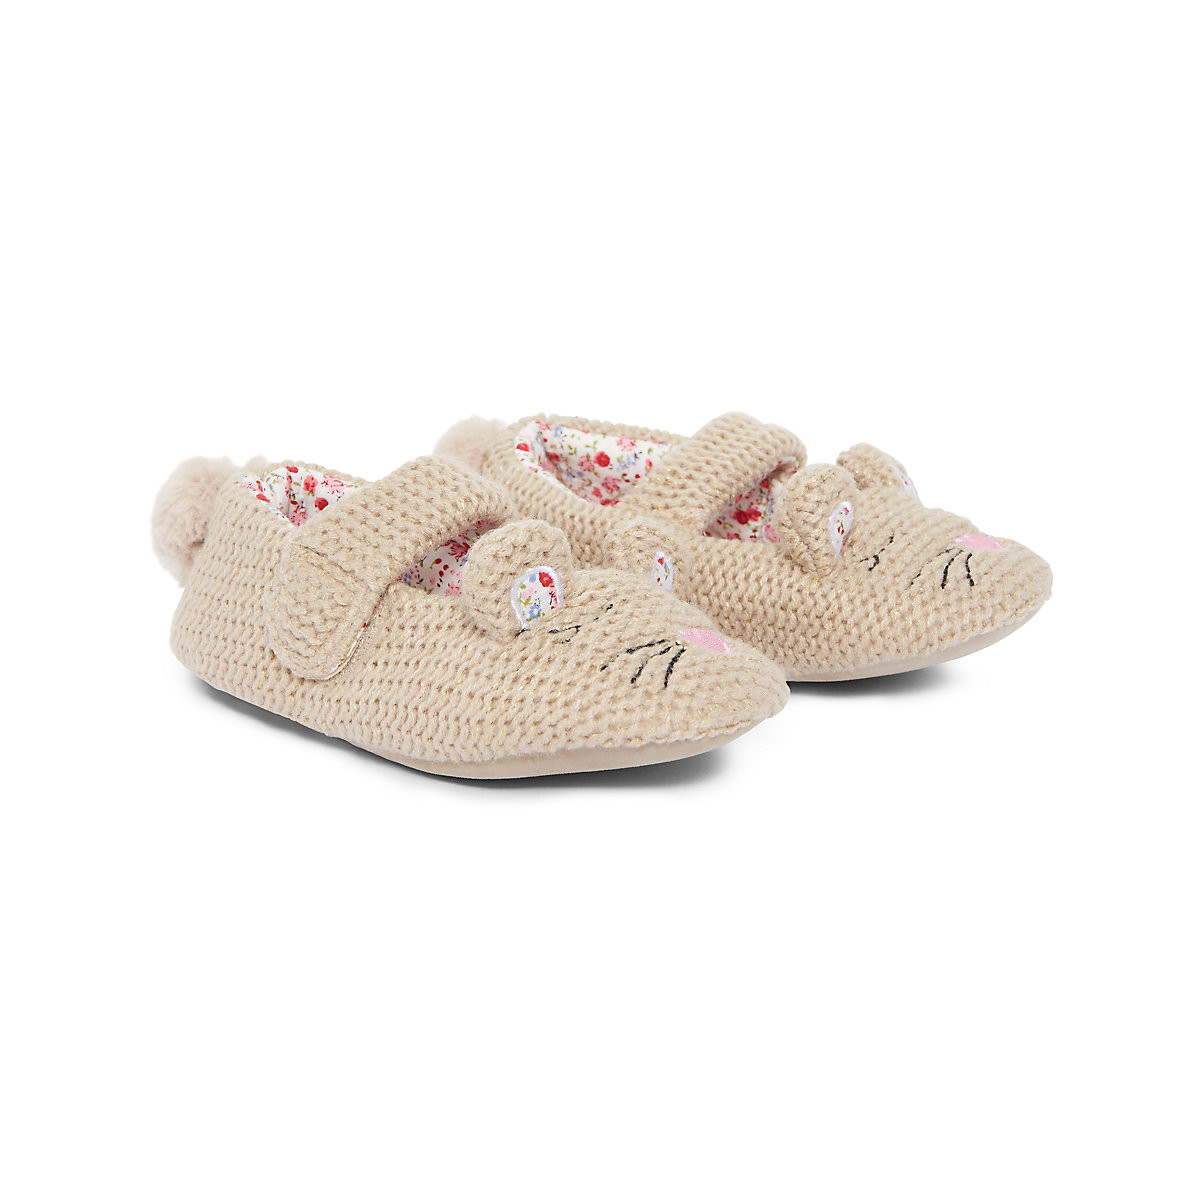 Mothercare Knitted Mouse Slippers - Reviews